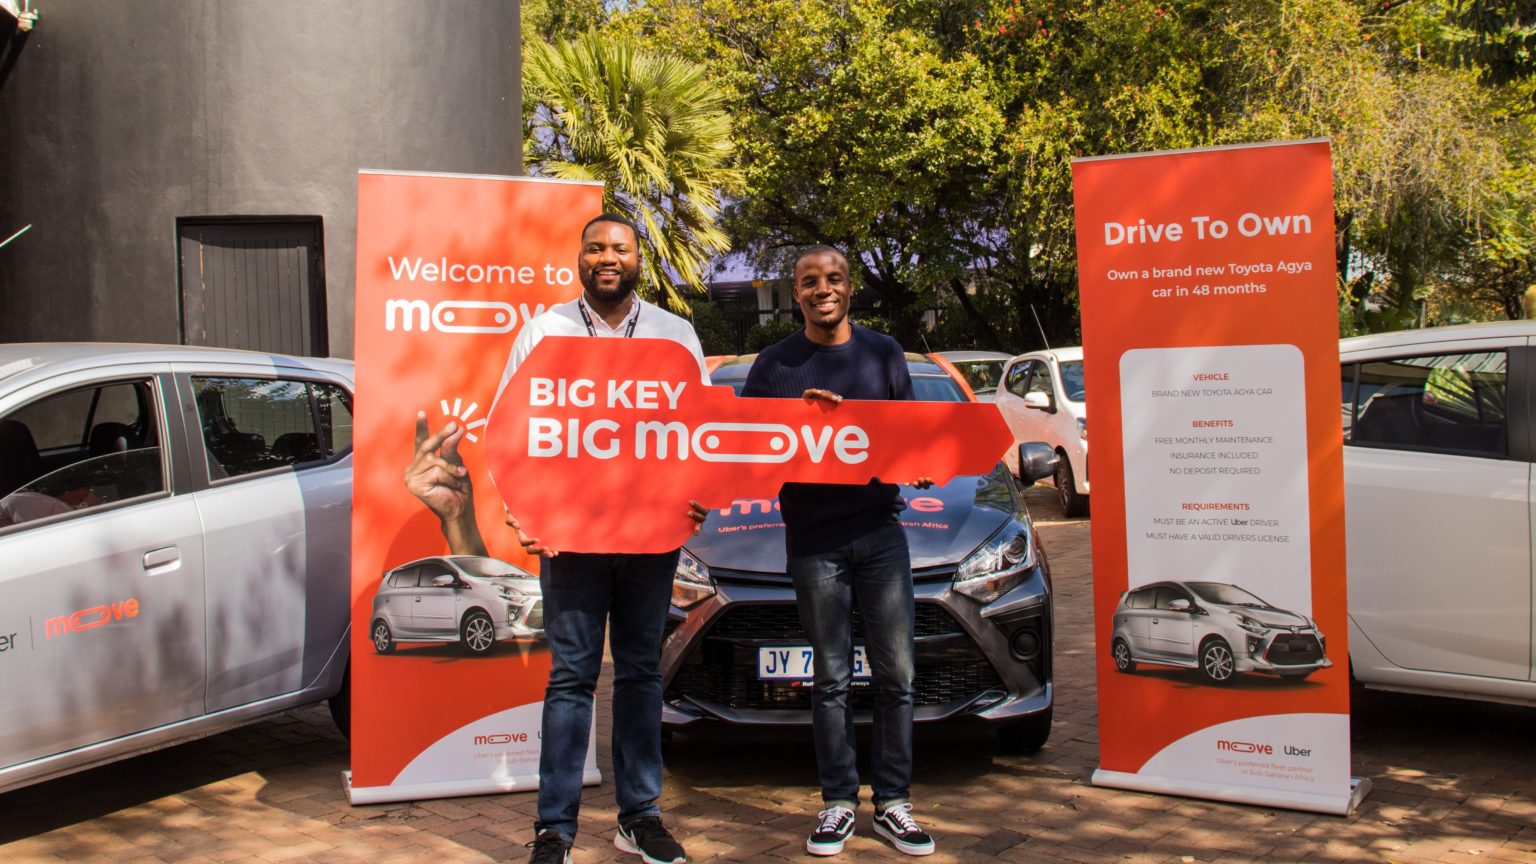 Uber Ventures into Africa with Investment in Moove's $100 Million Series B